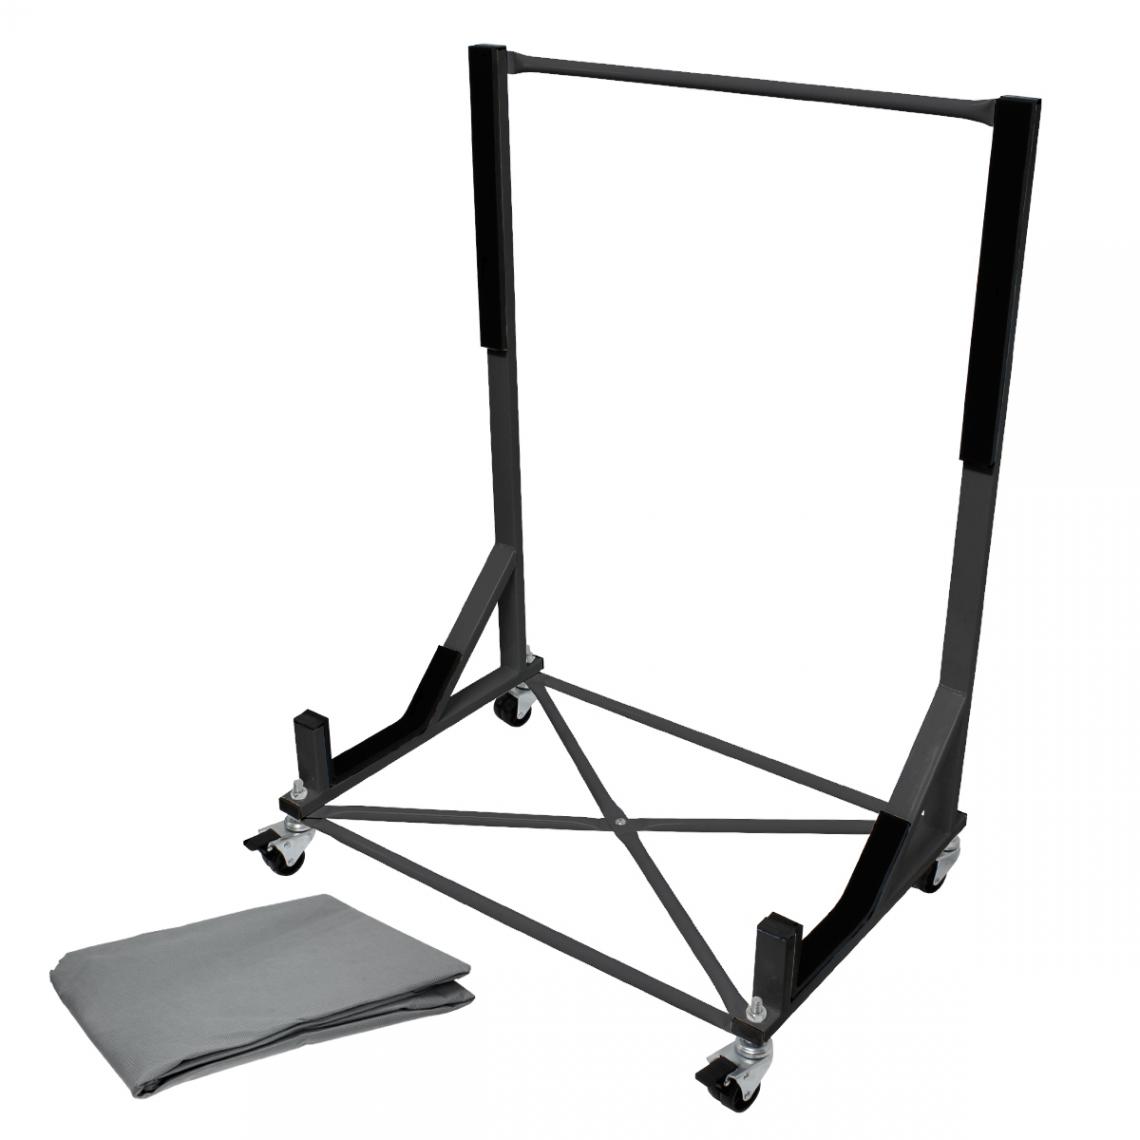 Ecd Germany - Hardtop stand rigide chariot support capote noir + housse Mercedes Honda Mazda - Diable, chariot